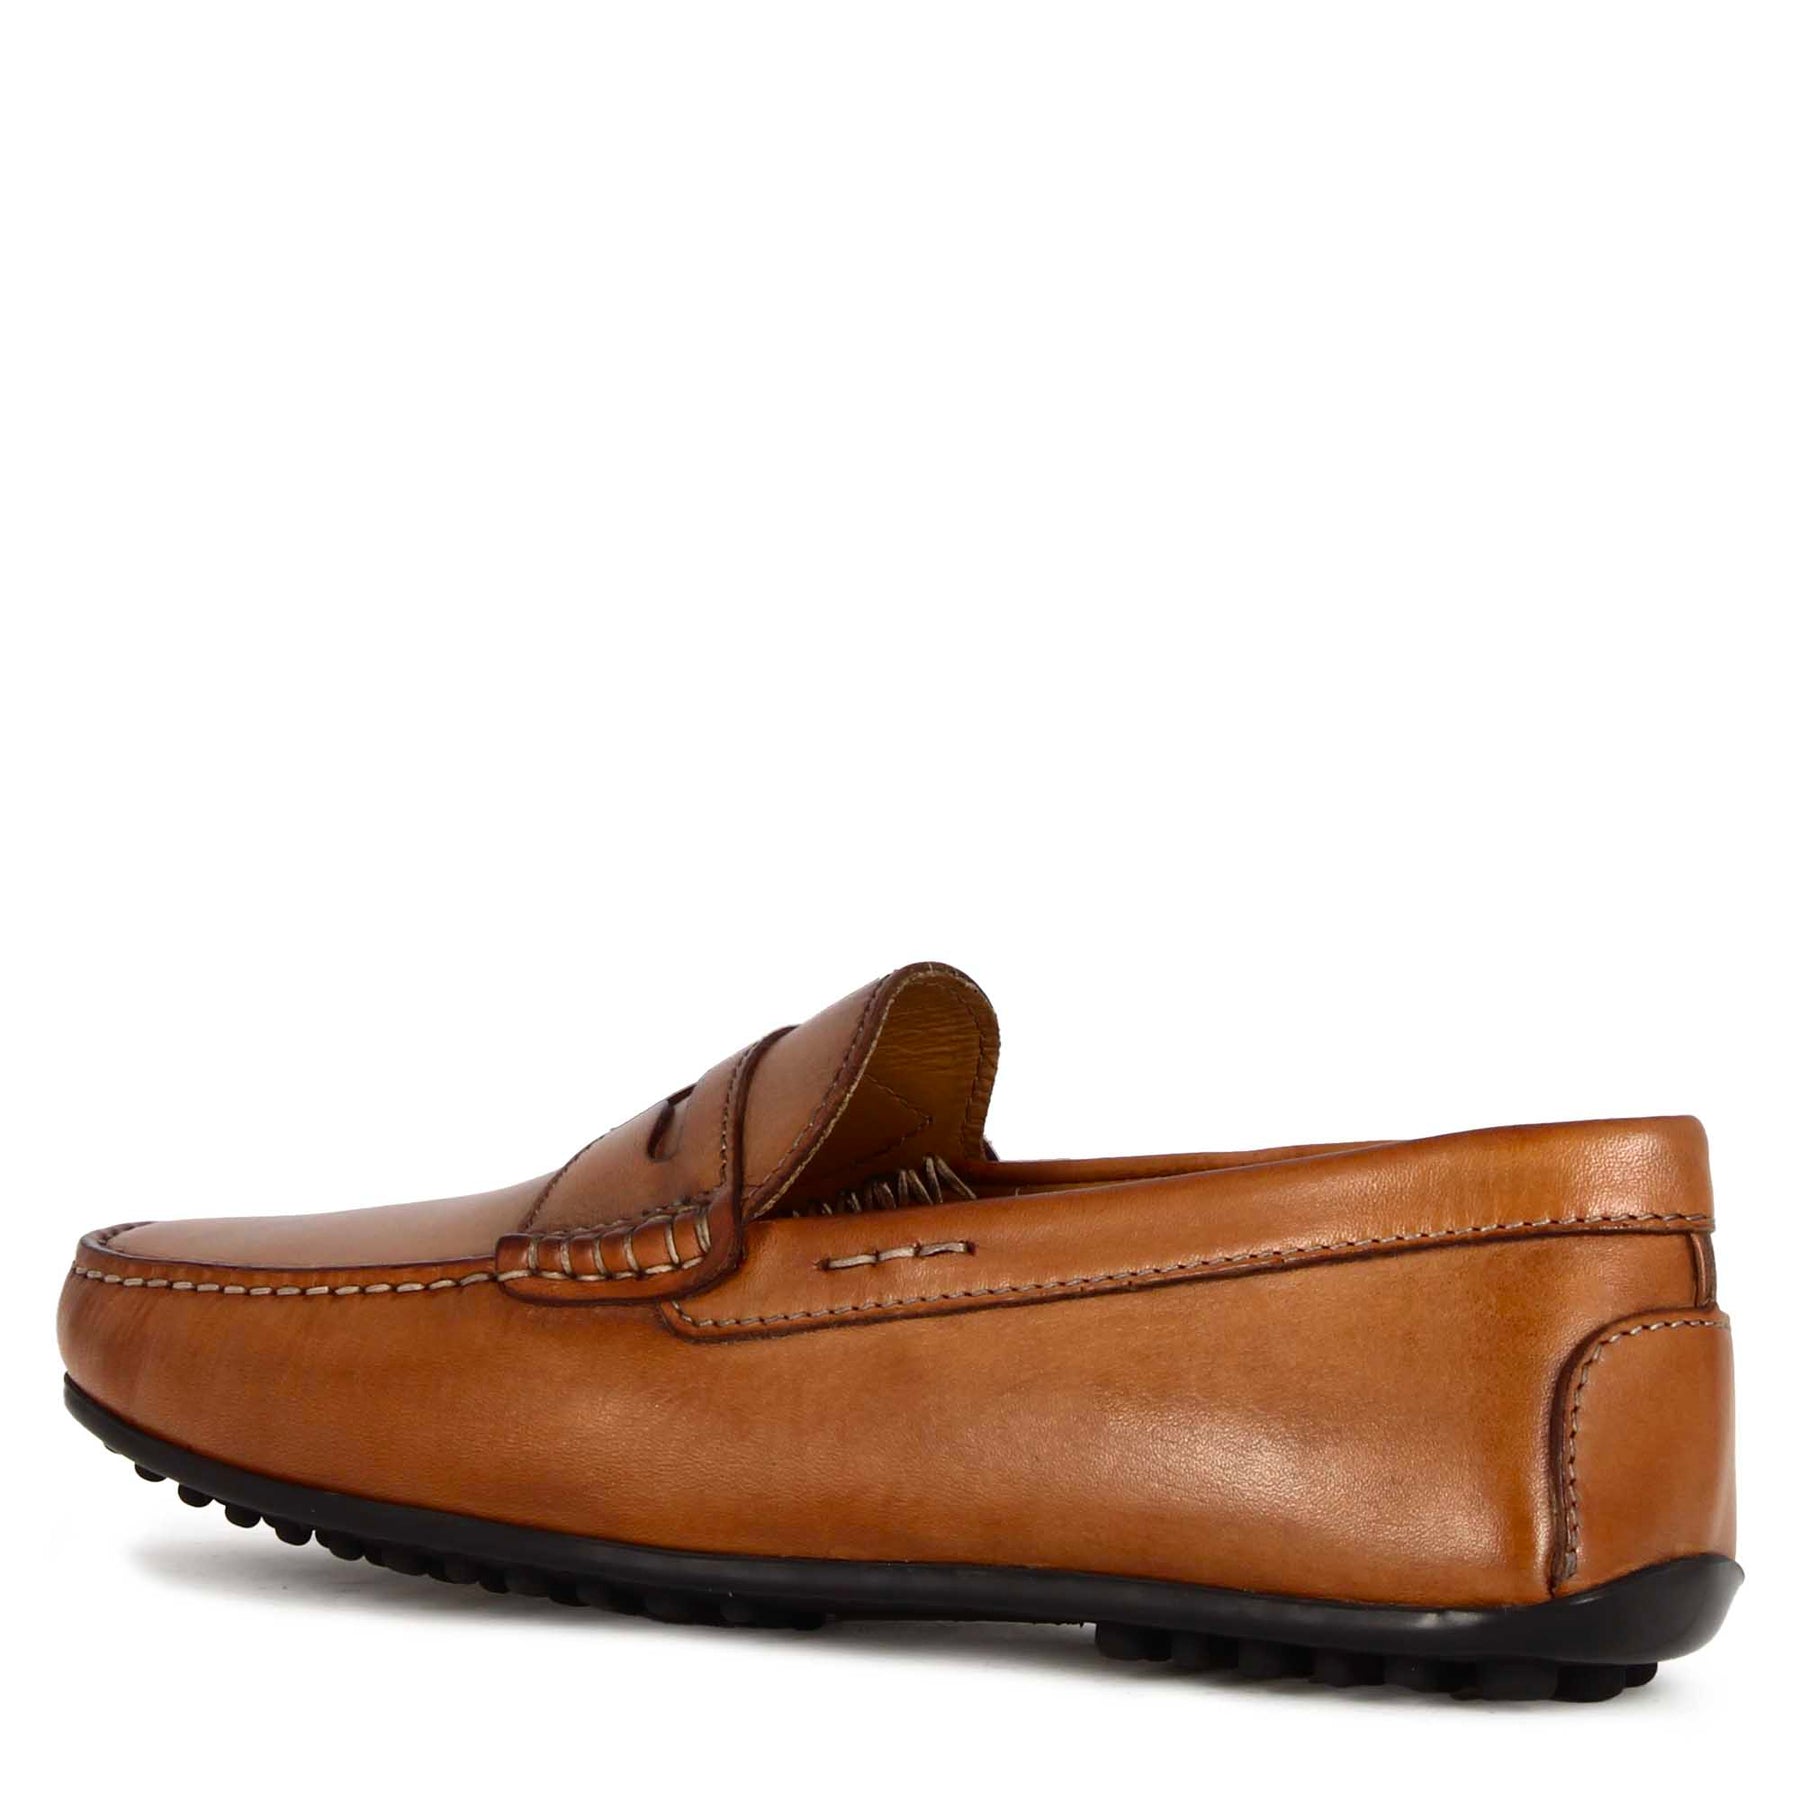 Men's casual handmade moccasin in brown leather with rubberised sole